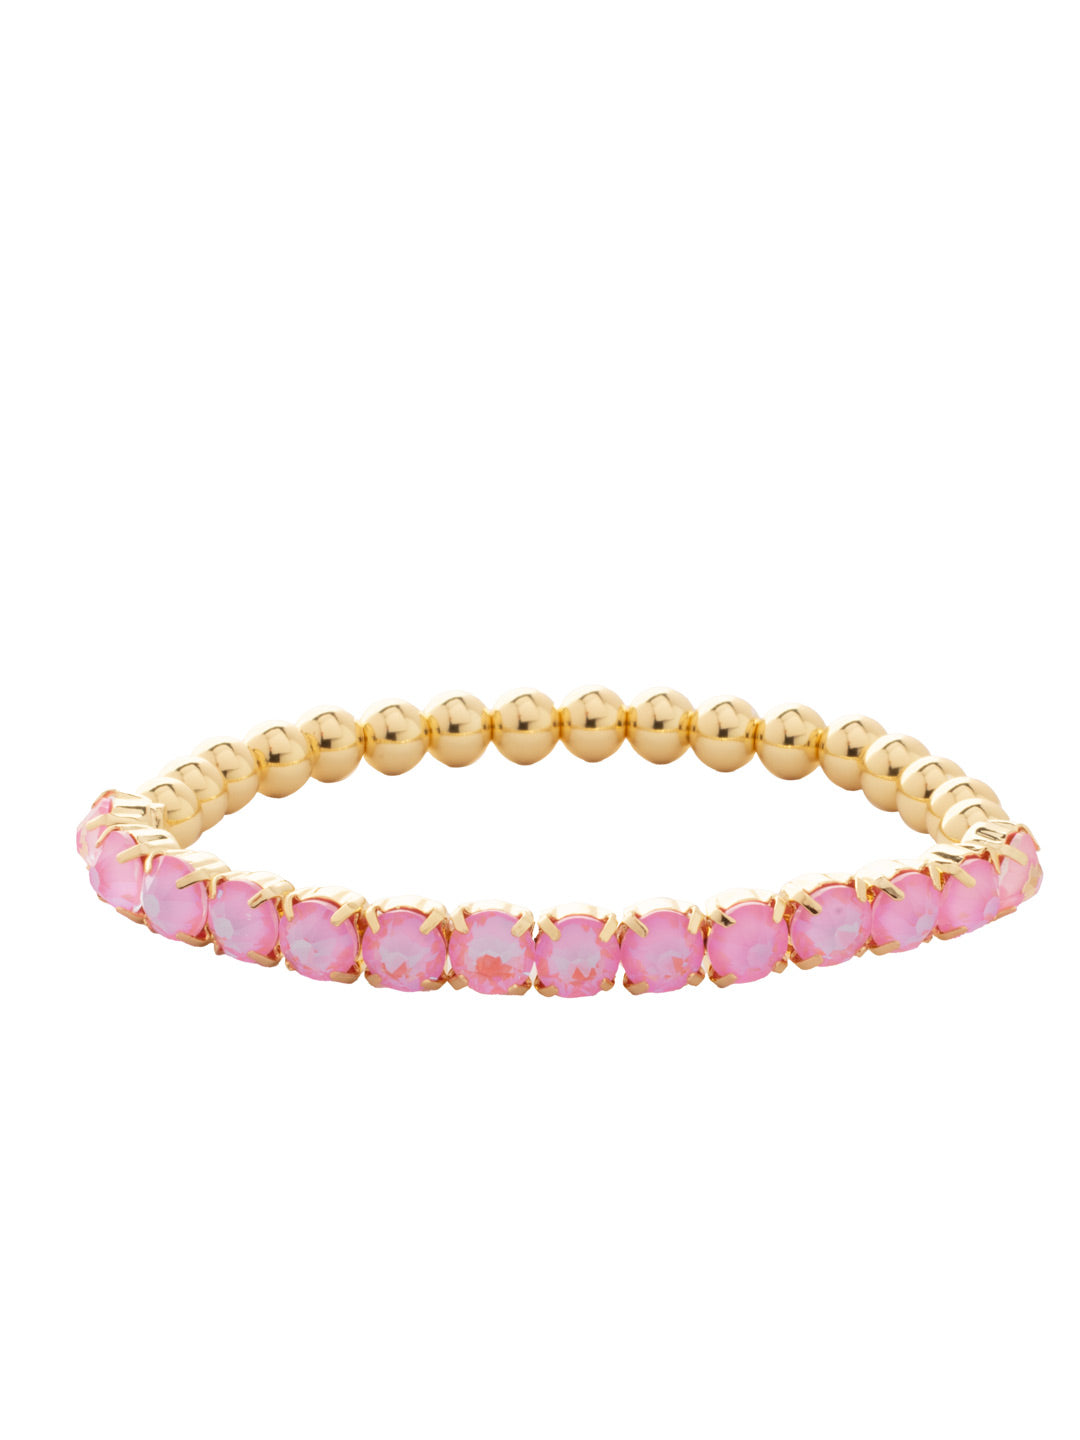 Mini Crystal Mini Zola Stretch Bracelet - BFN23BGLRD - <p>The Mini Crystal Mini Zola Stretch Bracelet features round cut crystals and metal beads on a sturdy jewelers' filament, stretching to fit most wrists comfortably, without the hassle of a clasp! (7 inches in diameter, fits average wrist sizes) From Sorrelli's Light Rose Delite collection in our Bright Gold-tone finish.</p>